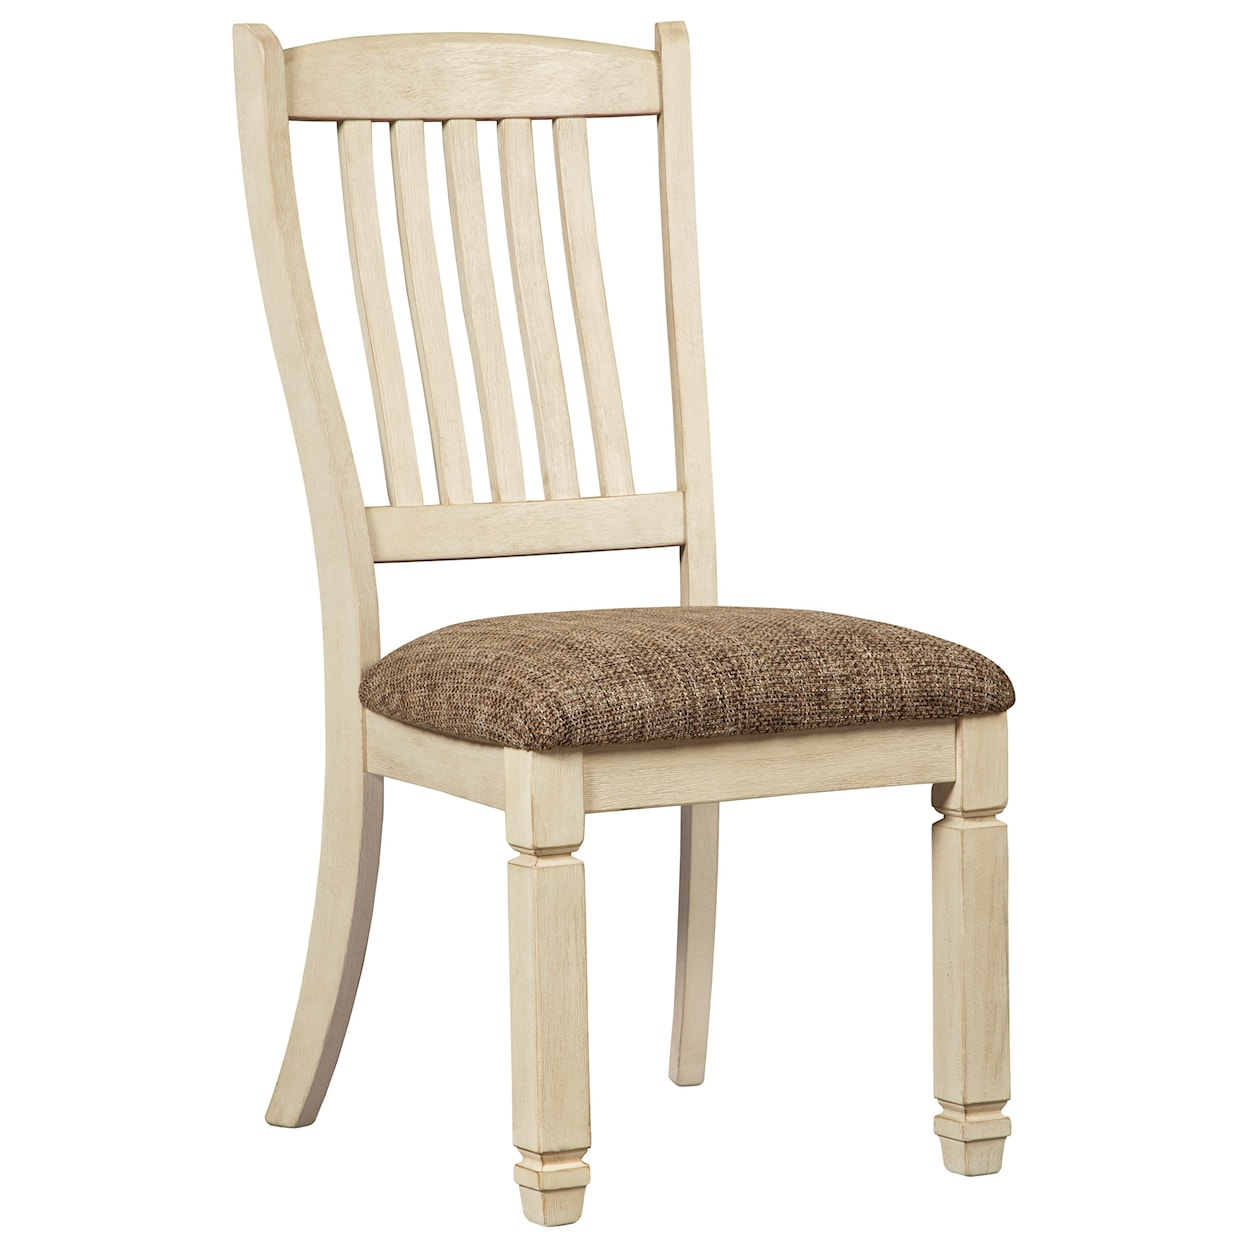 Benchcraft Bolanburg Table and Chair Set with Bench